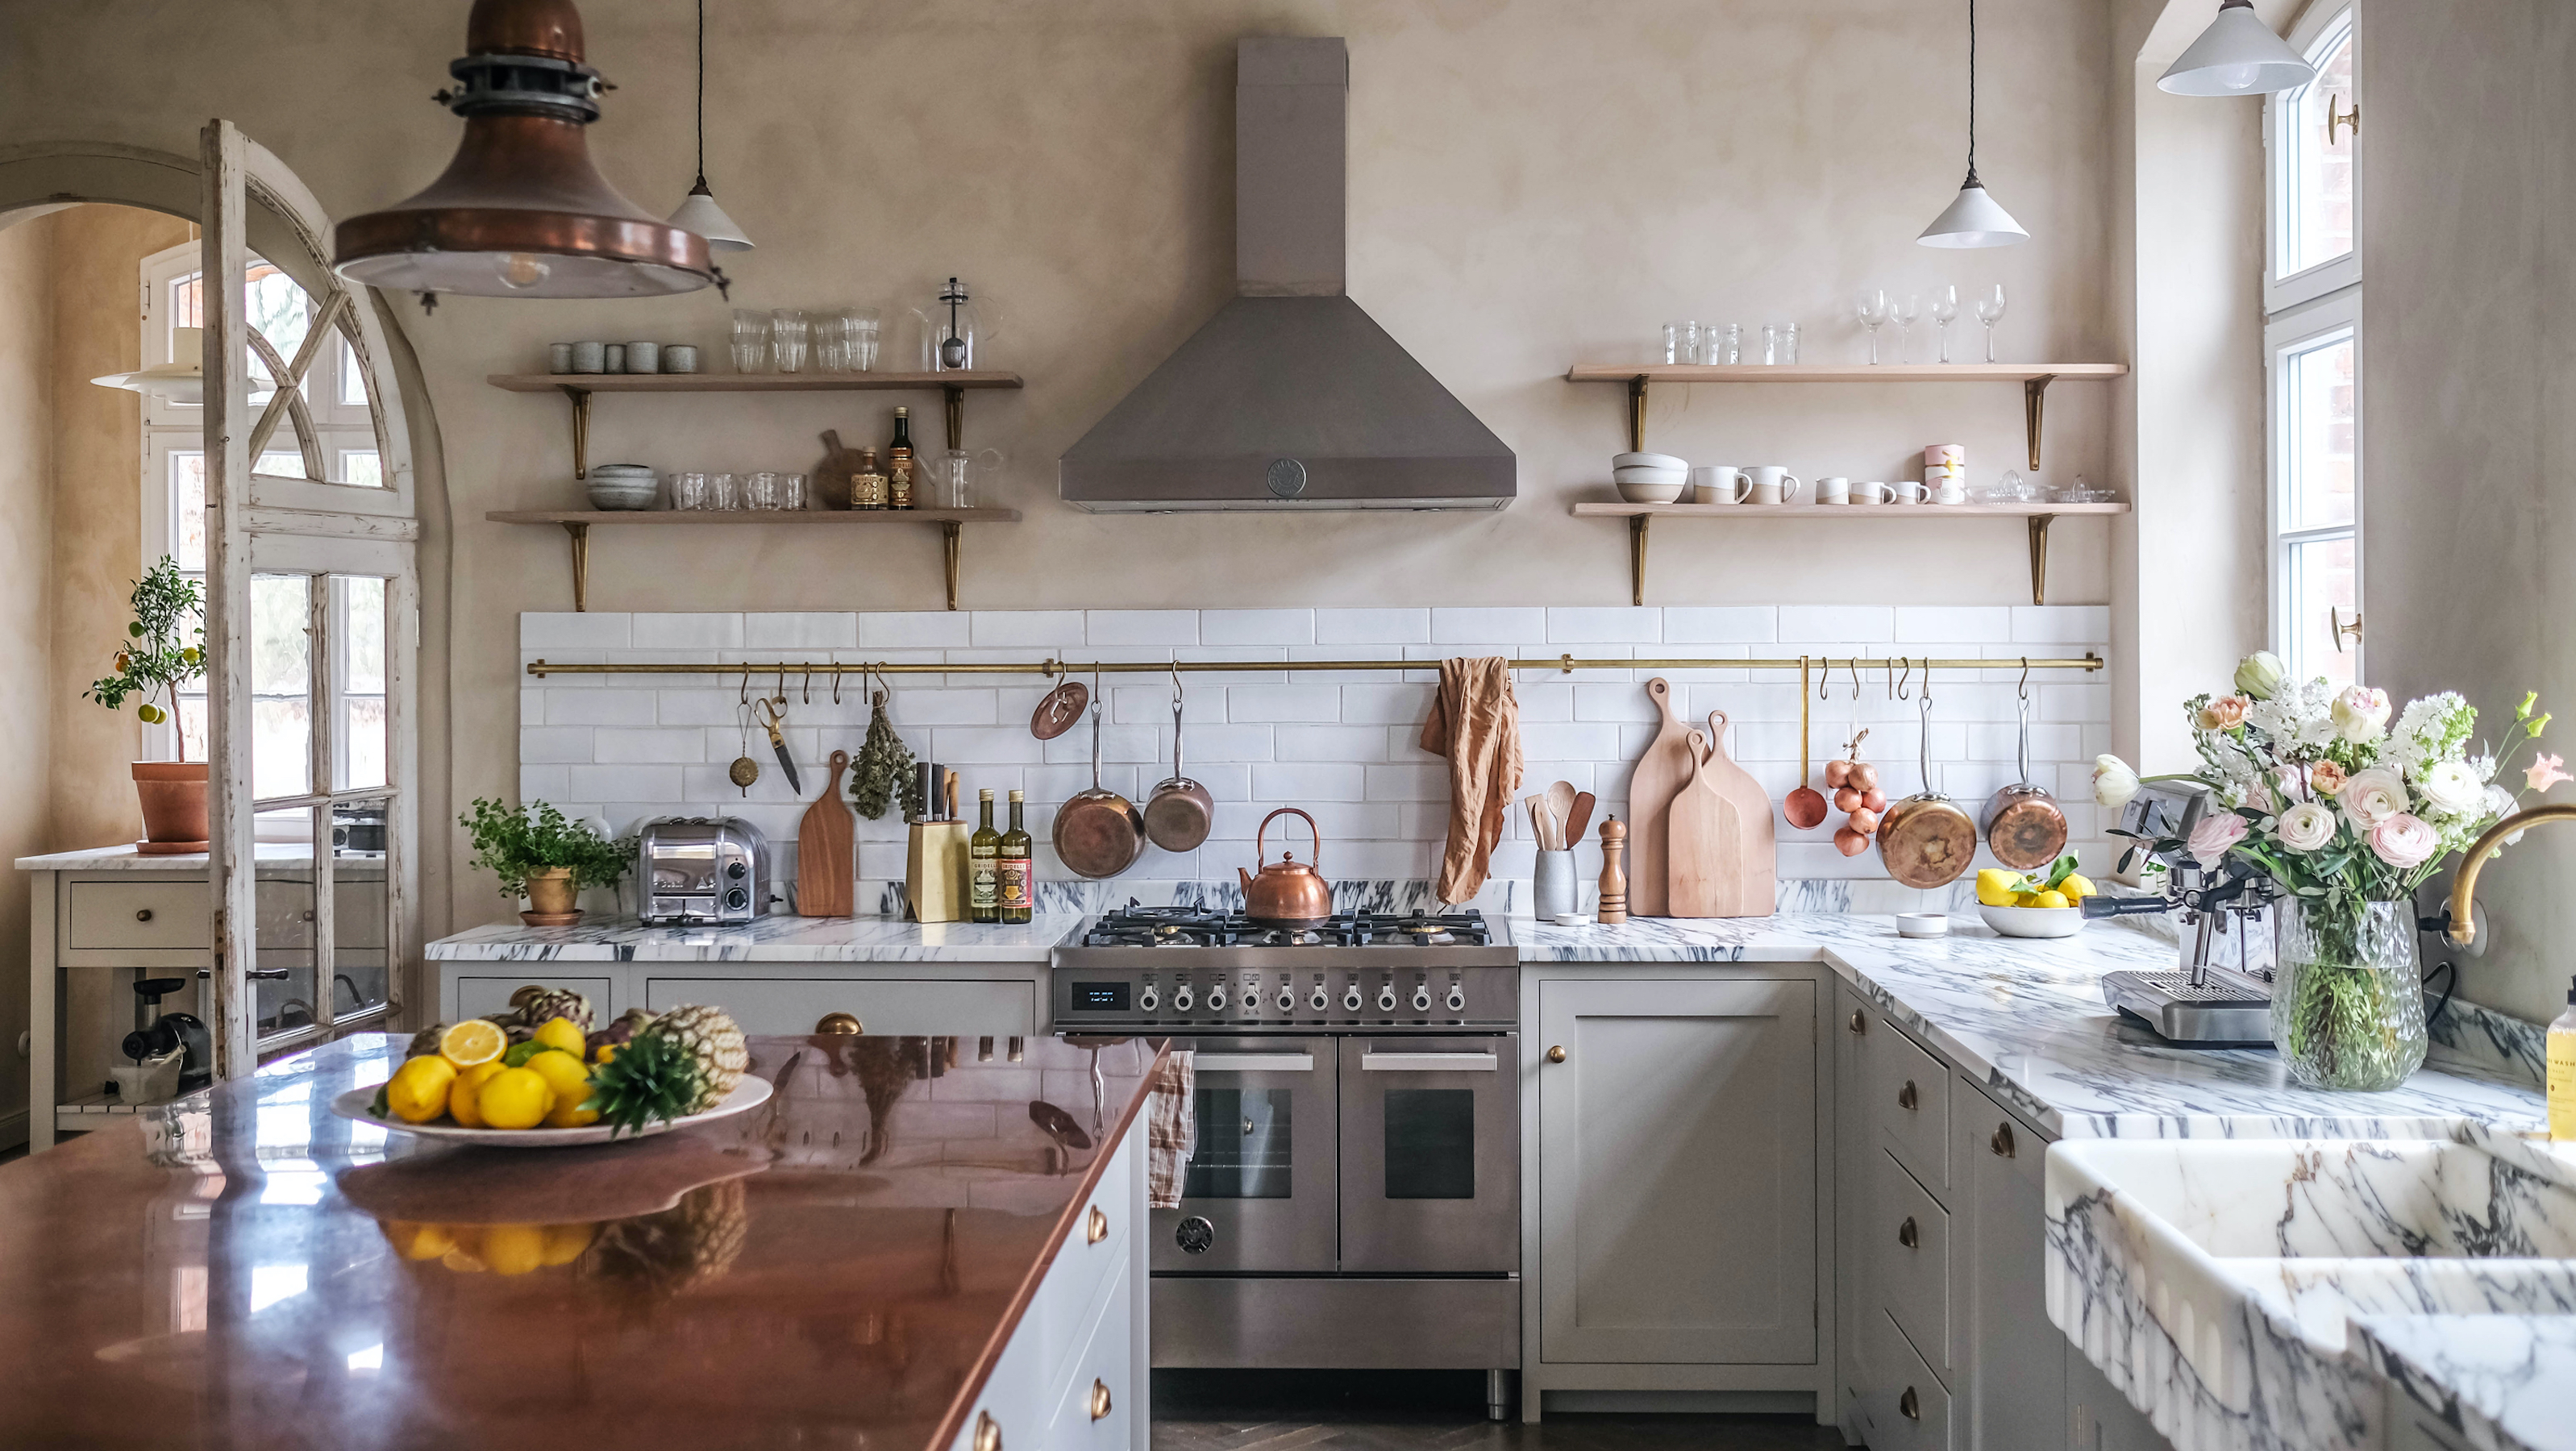 How to create a country kitchen – the key features   Country